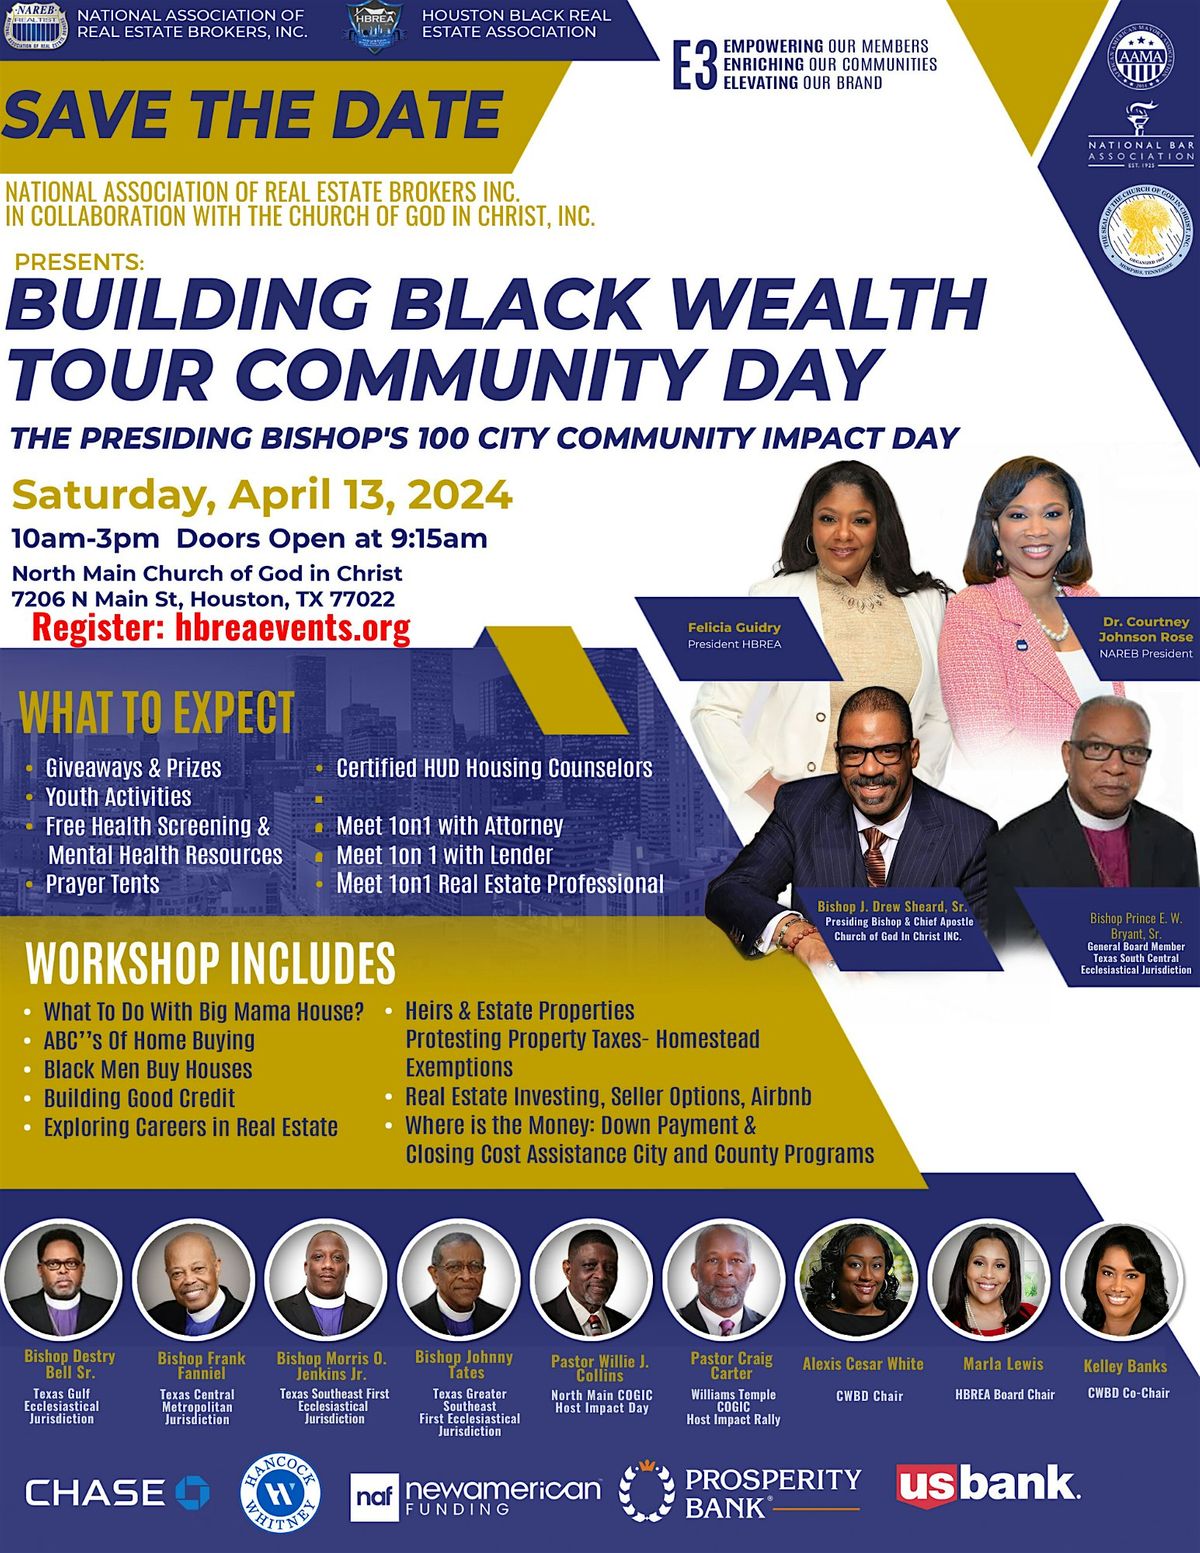 NAREB & COGIC  with HBREA Building Black Tour Community Wealth Building Day